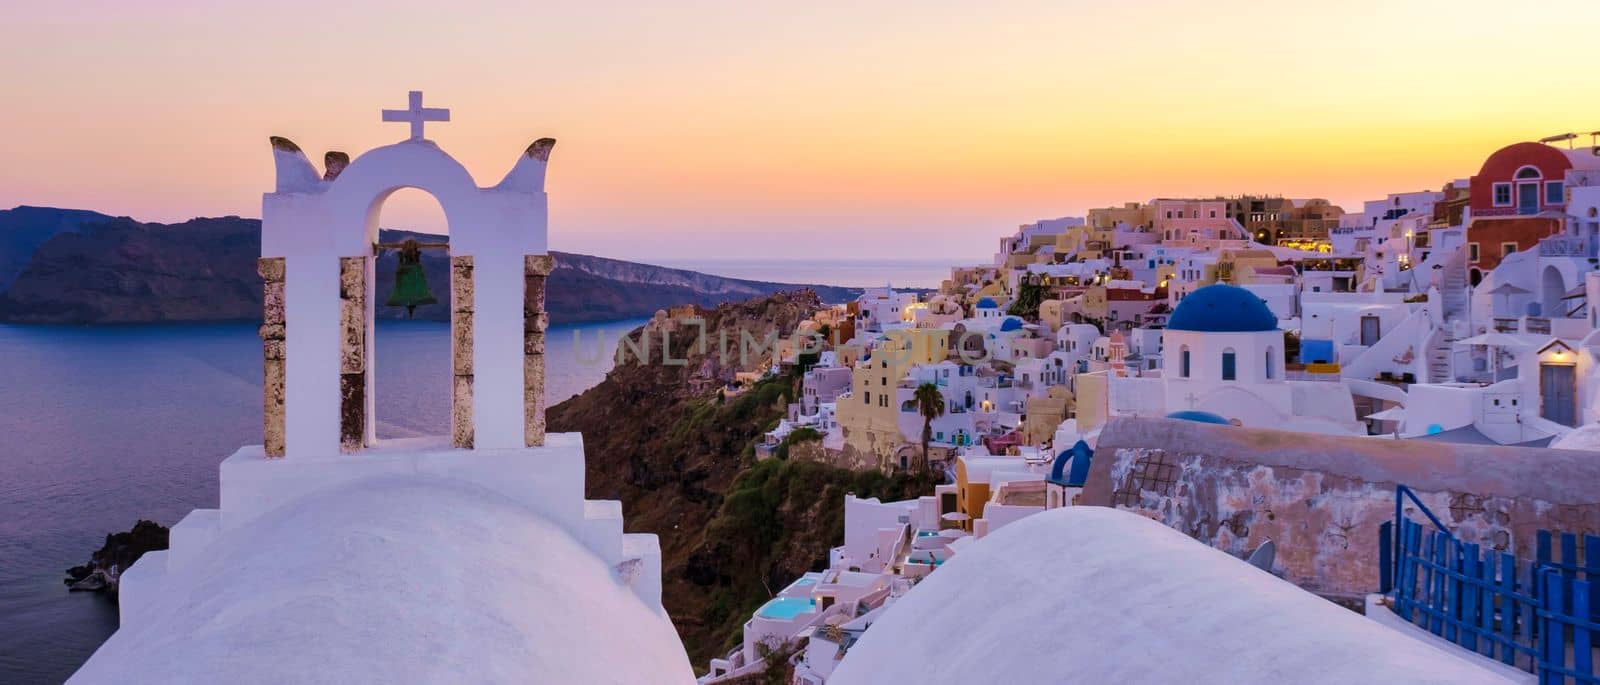 Sunset at the Greek village of Oia Santorini Greece with a view over the ocean caldera by fokkebok